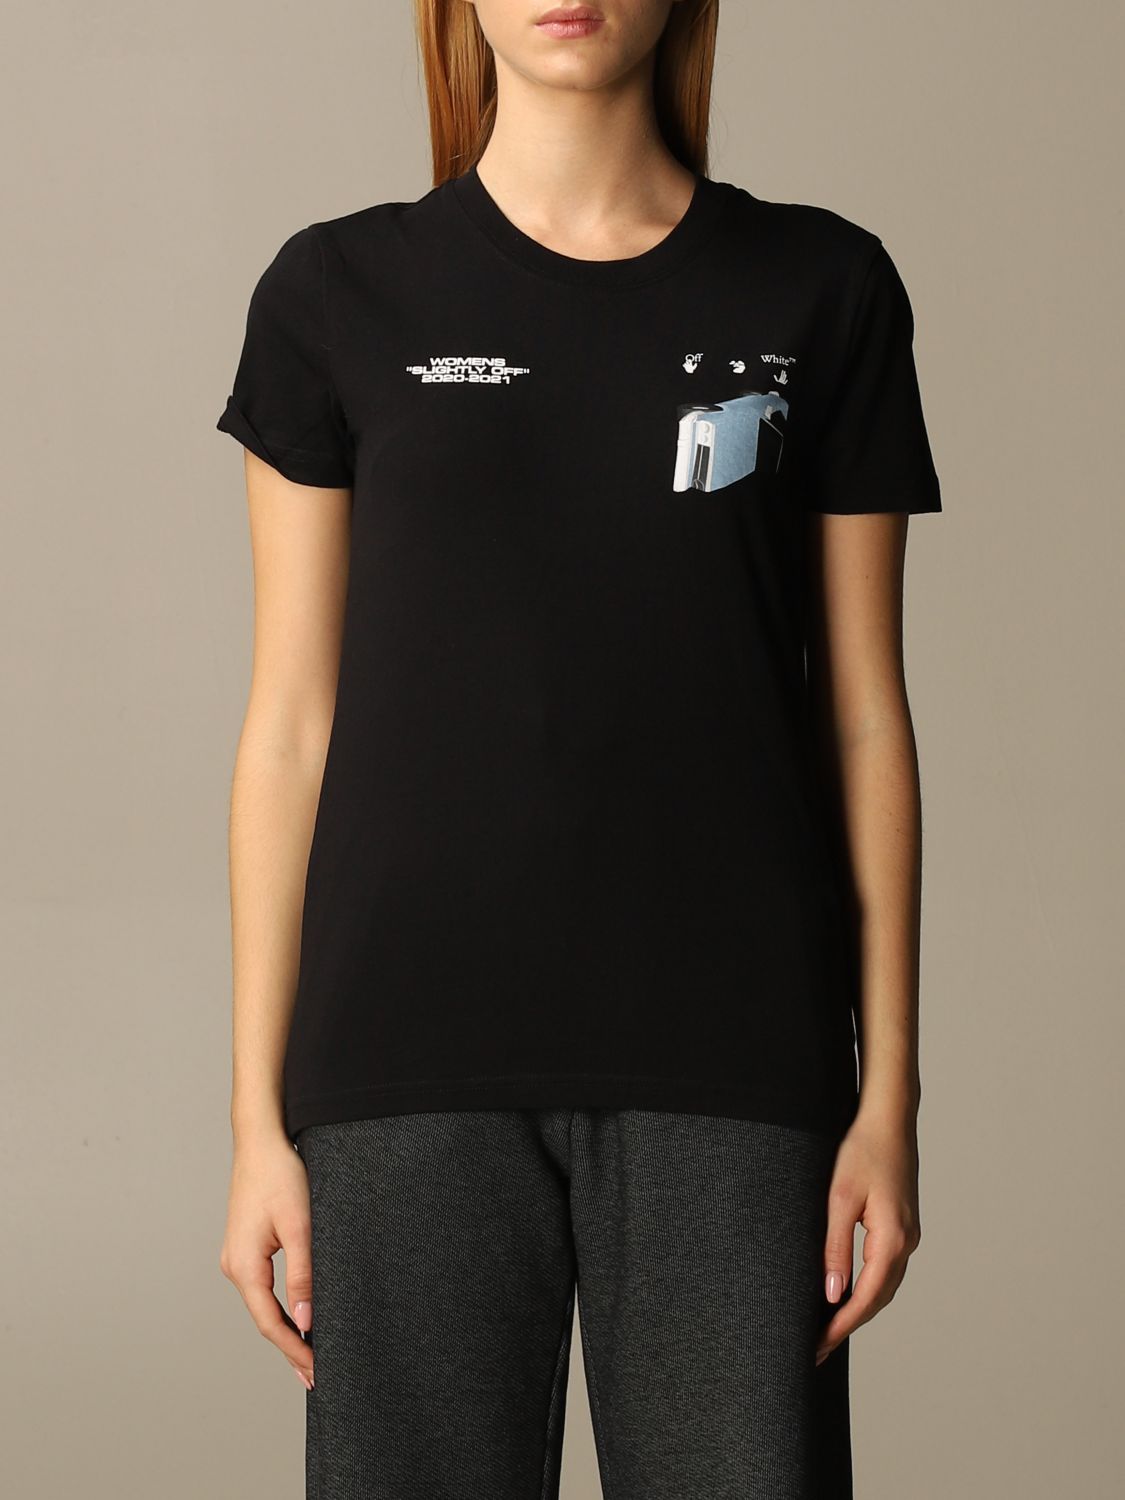 OFF-WHITE: Off White T-shirt with back print - Black | T-Shirt Off ...